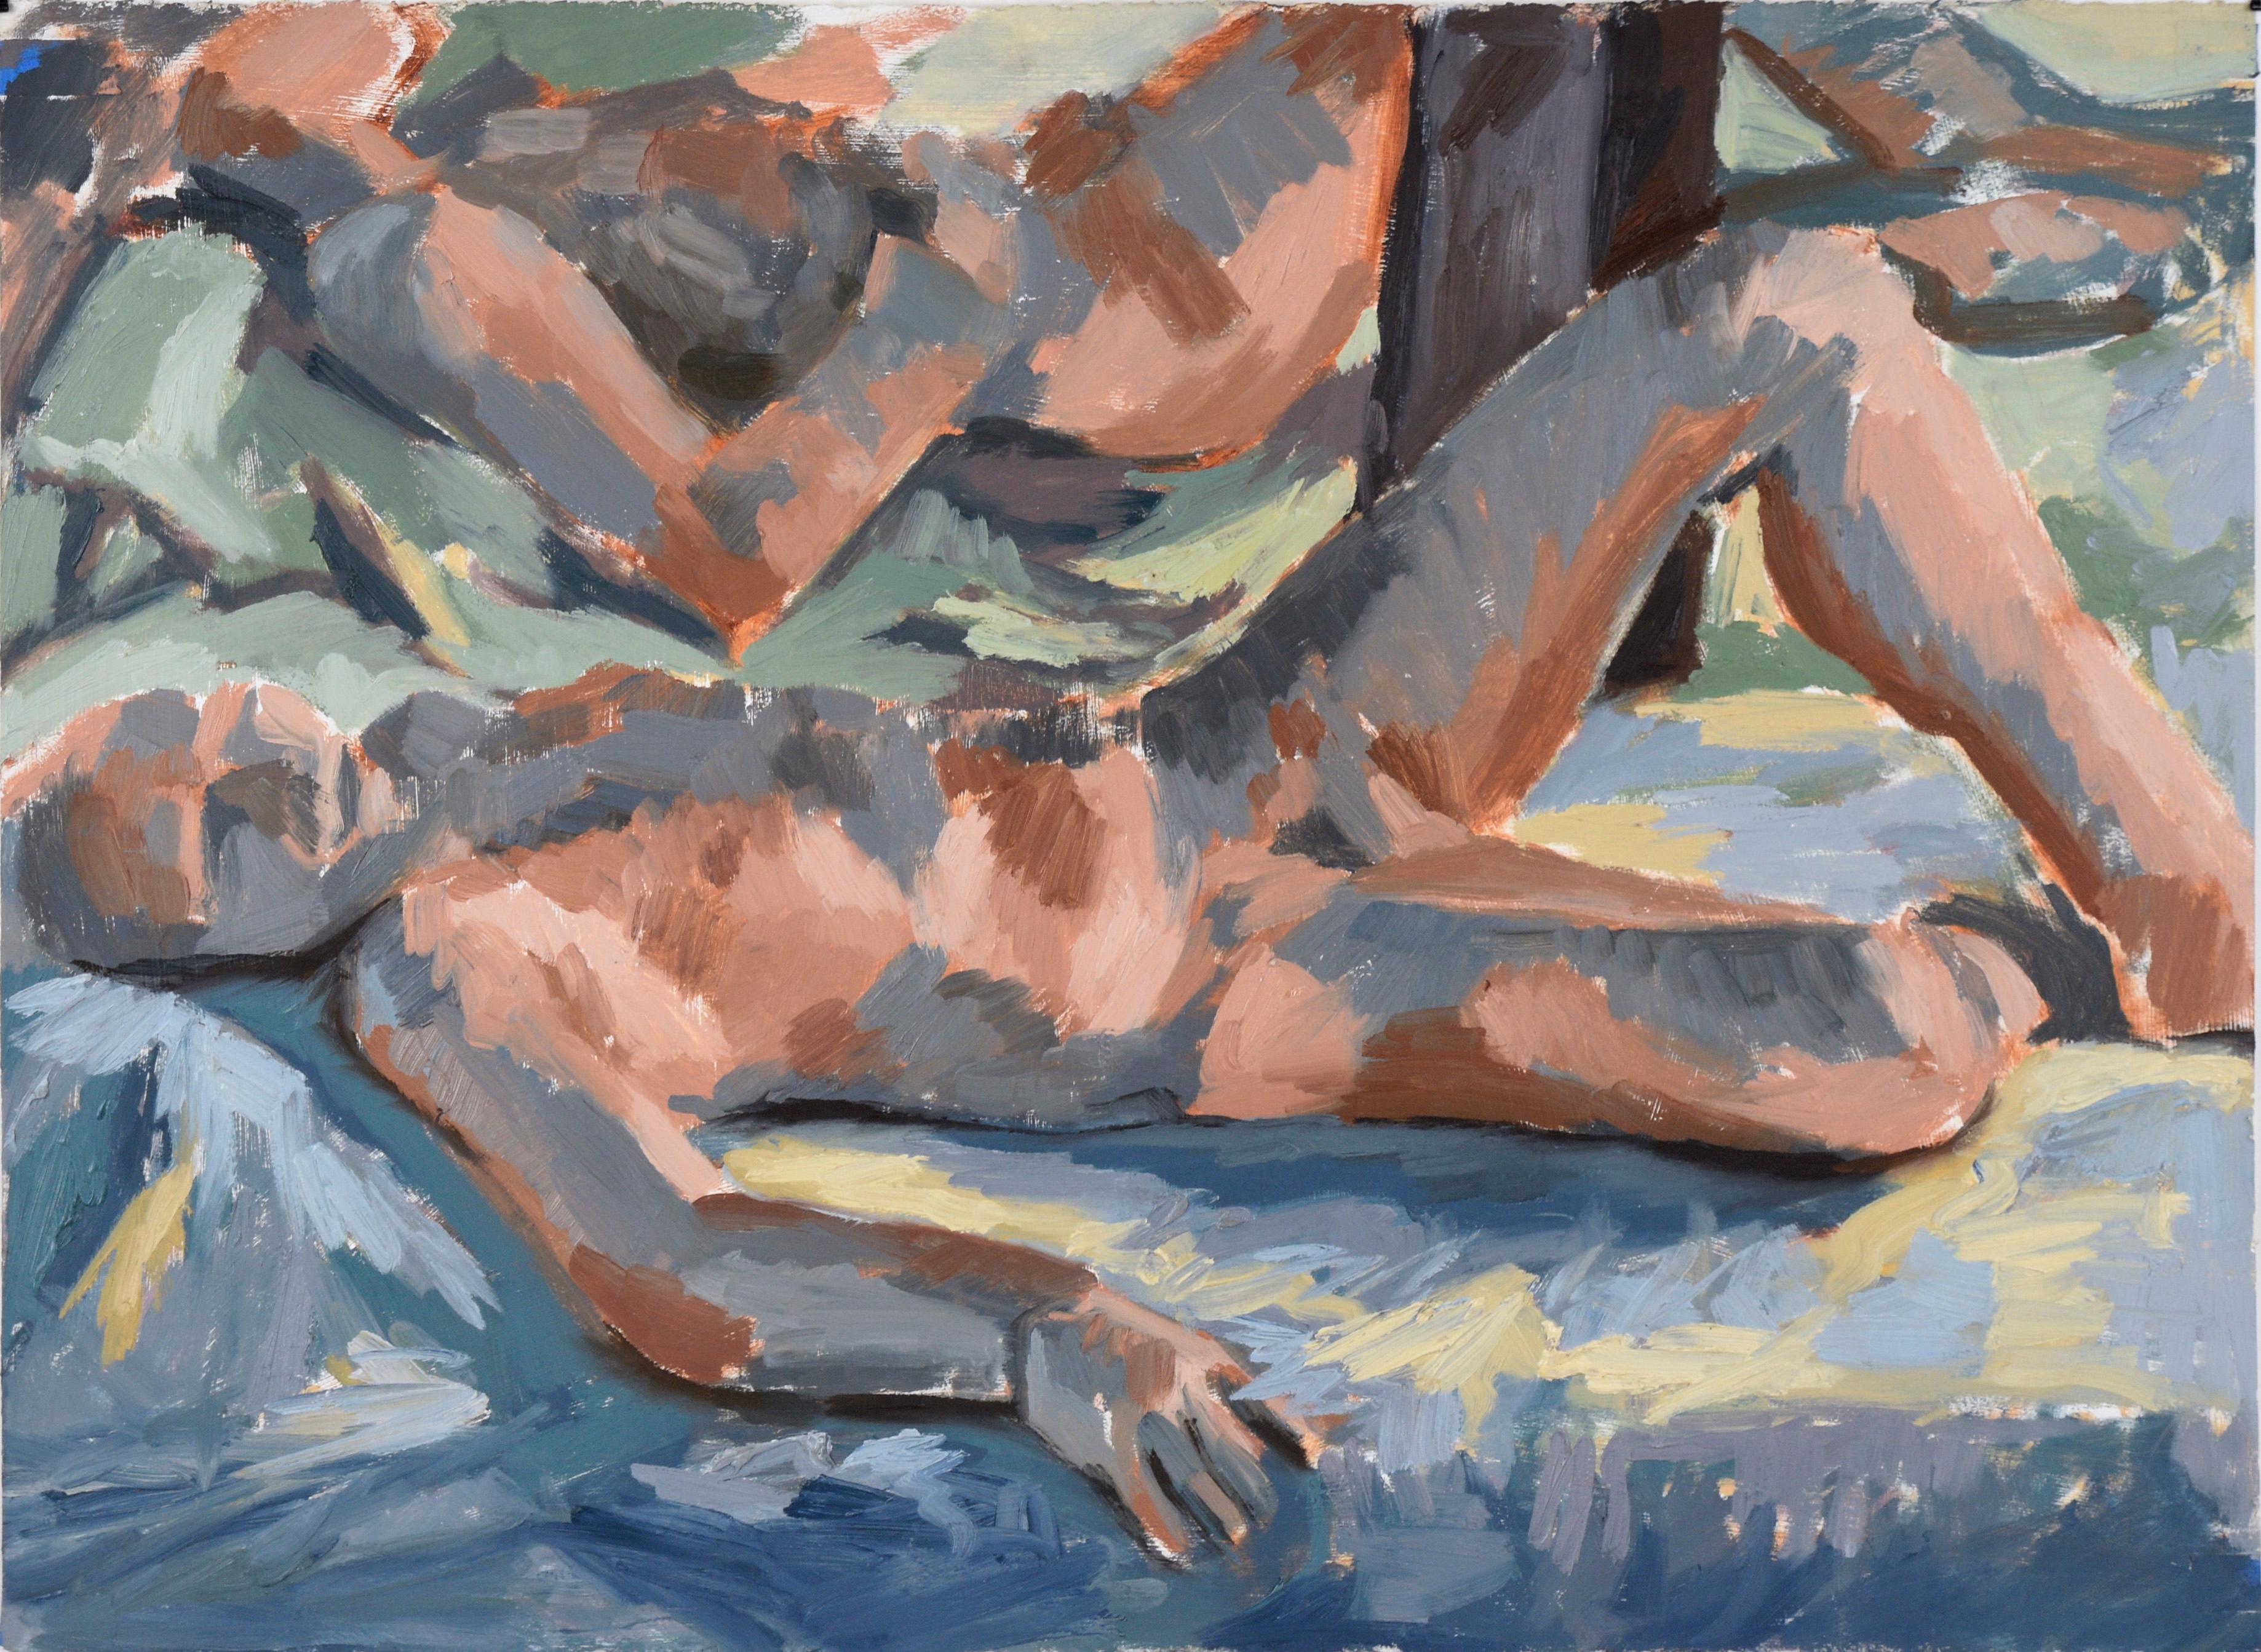 Heather Speck Figurative Painting - Two Reclining Figures - Bay Area Figurative School Abstract Expressionist